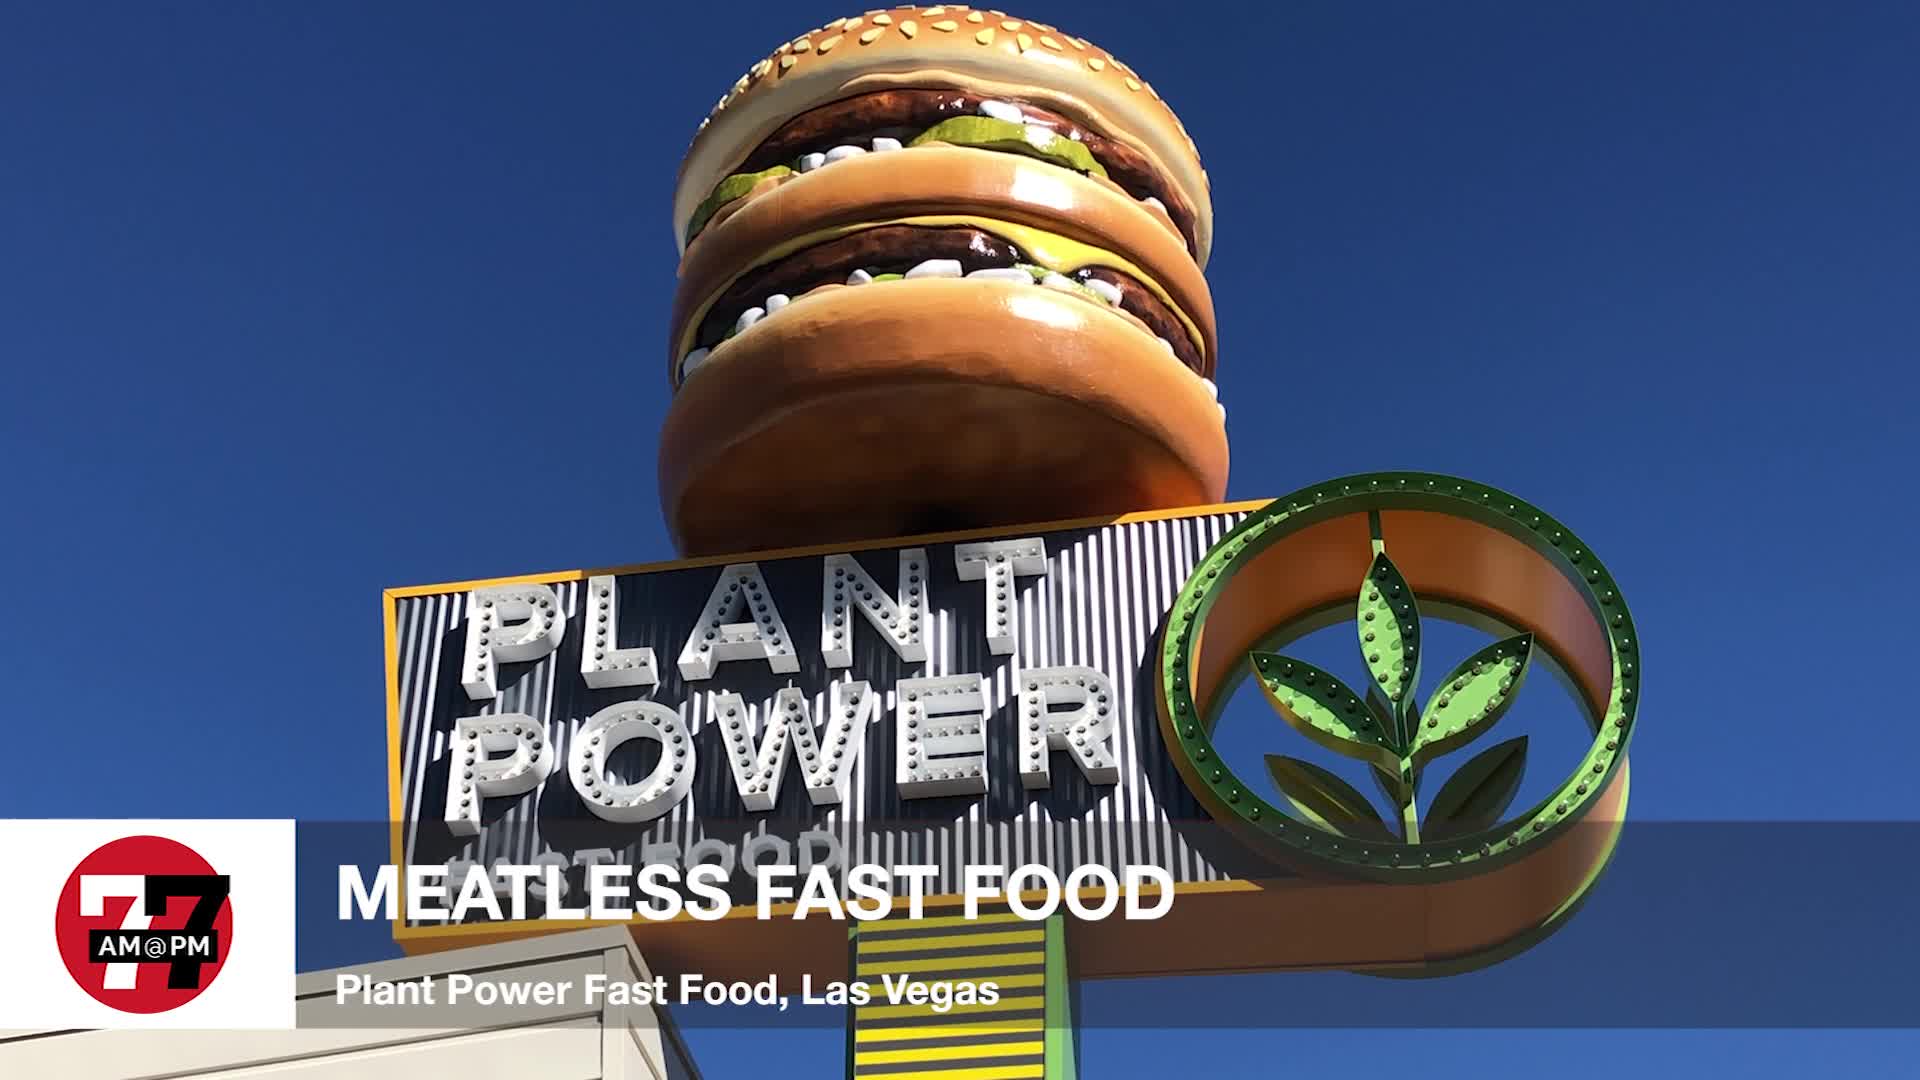 7@7PM Meatless Fast Food